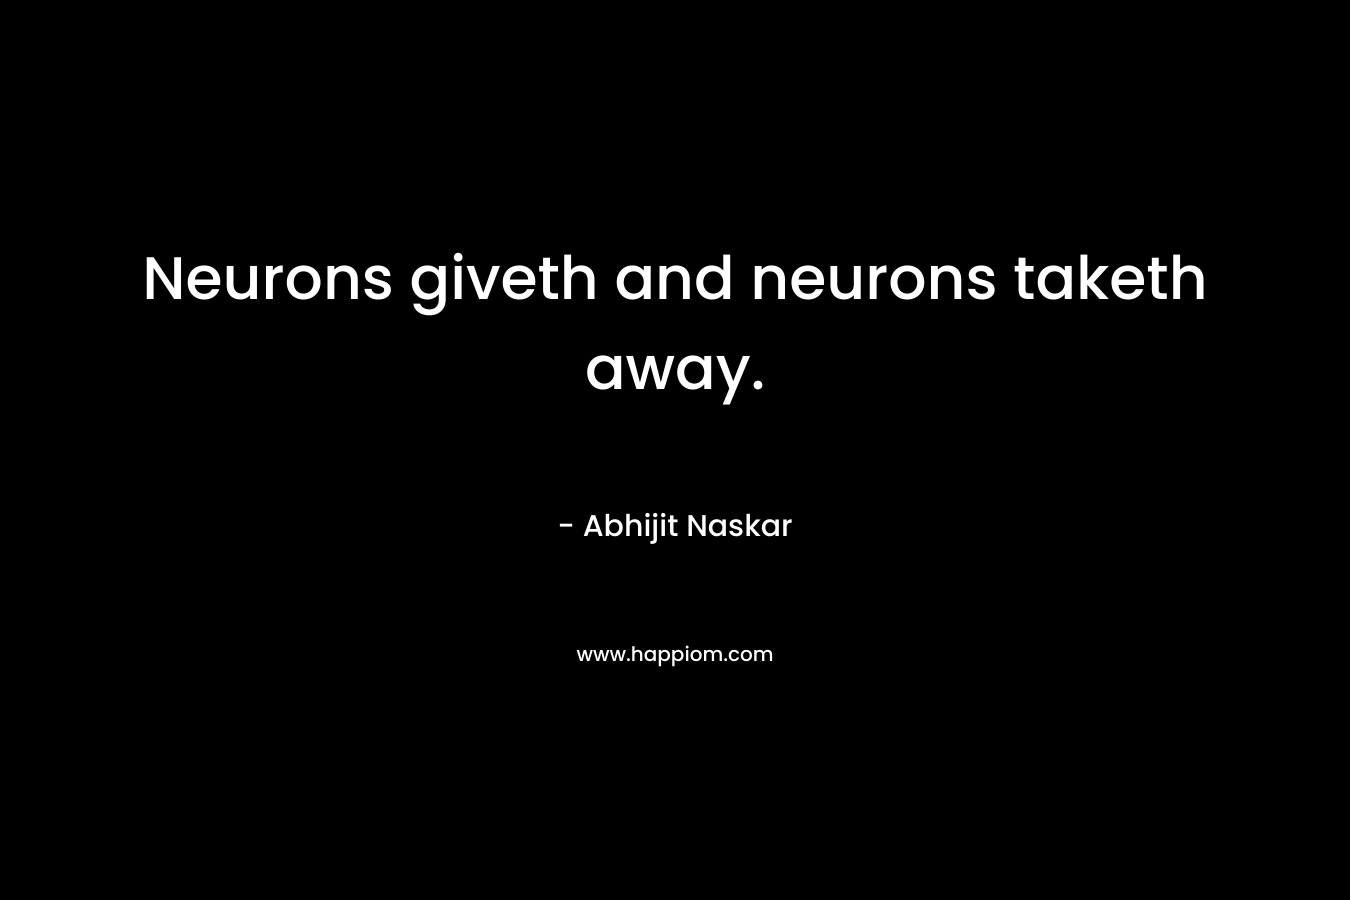 Neurons giveth and neurons taketh away.